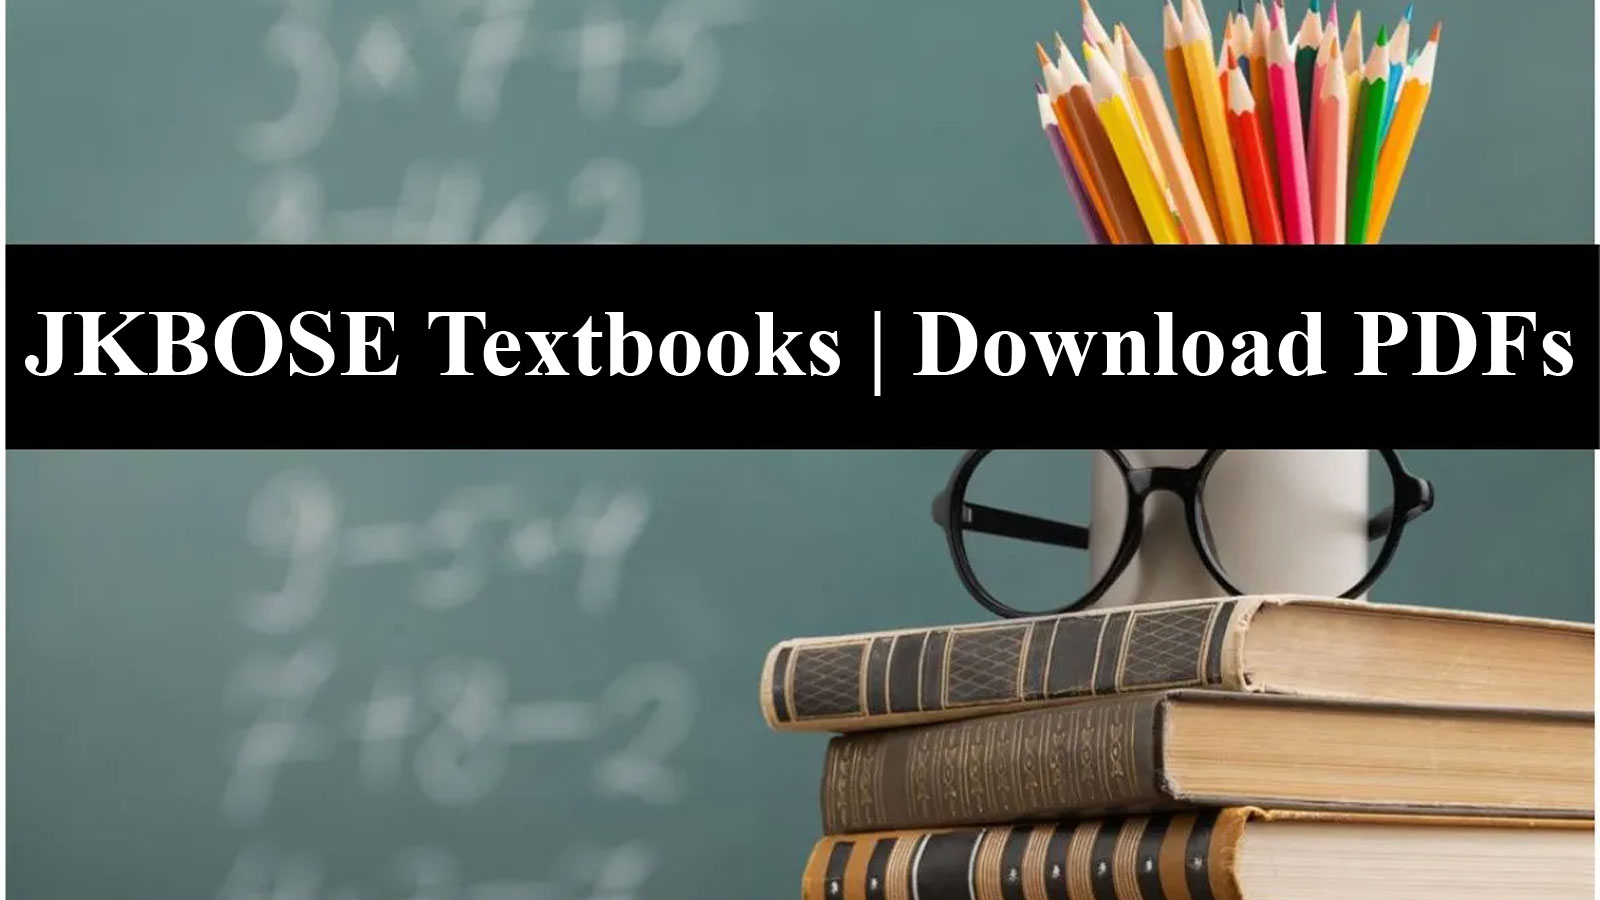 JKBOSE Class 8th Textbooks; Direct Link to Download PDFs